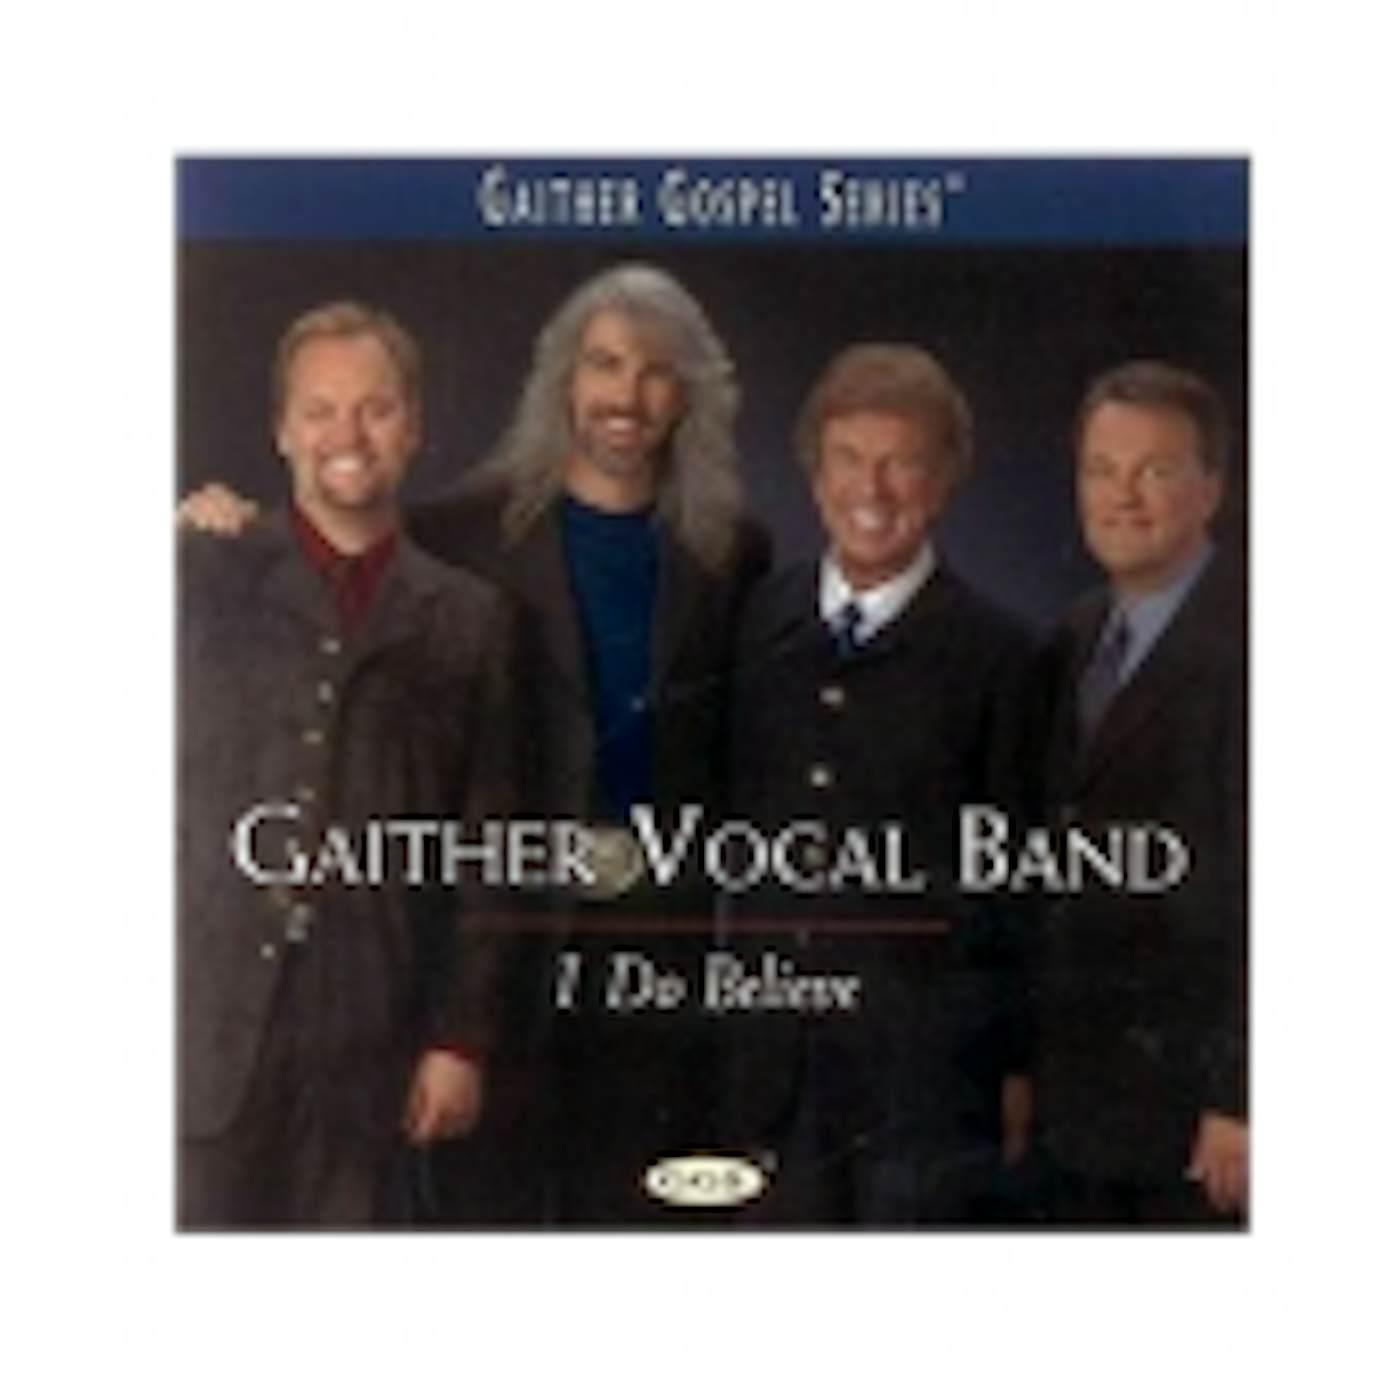 Guy Penrod Gaither Vocal Band CD- I Do Believe